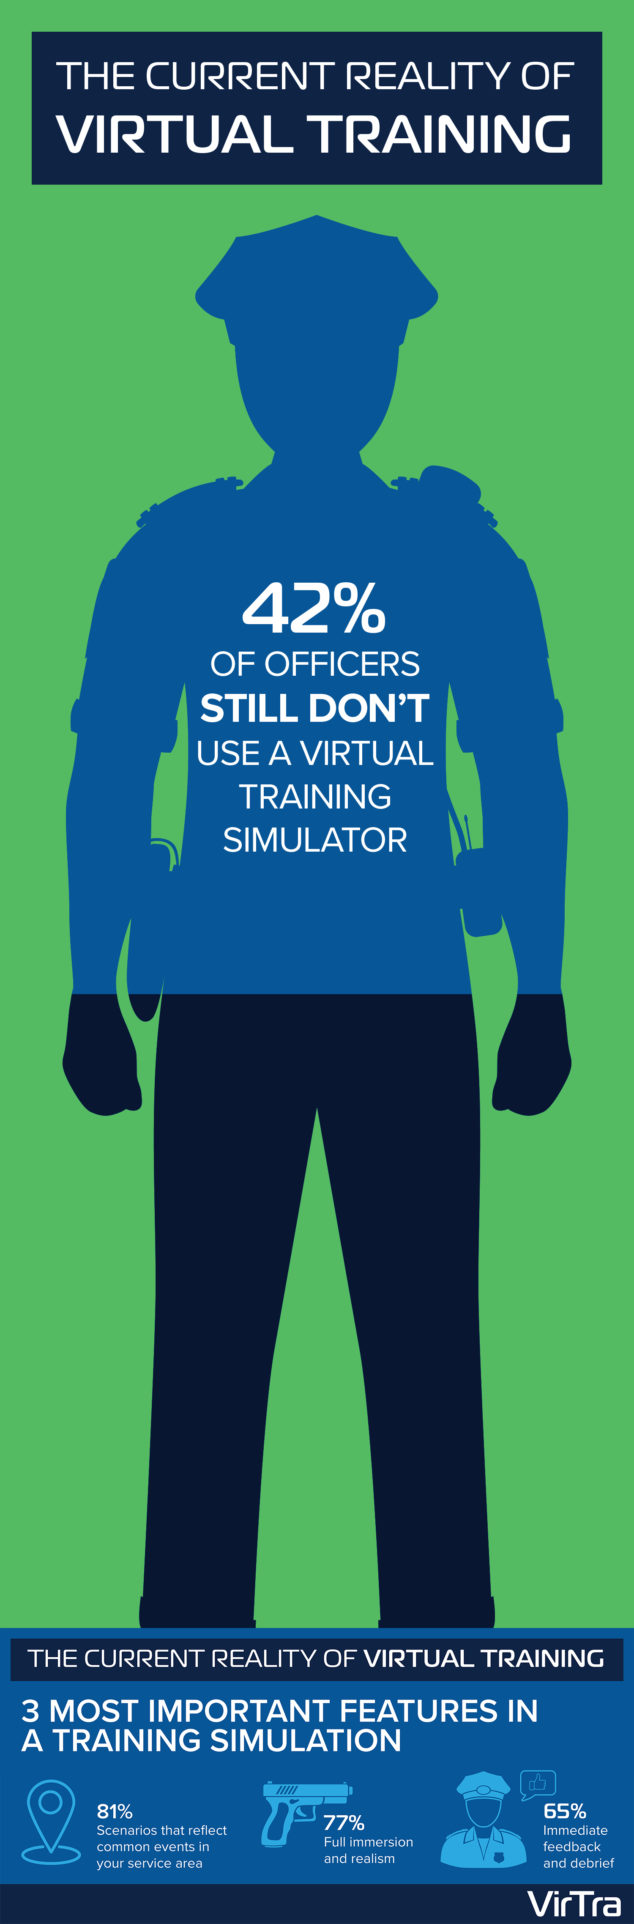 The Current Reality of Virtual Training